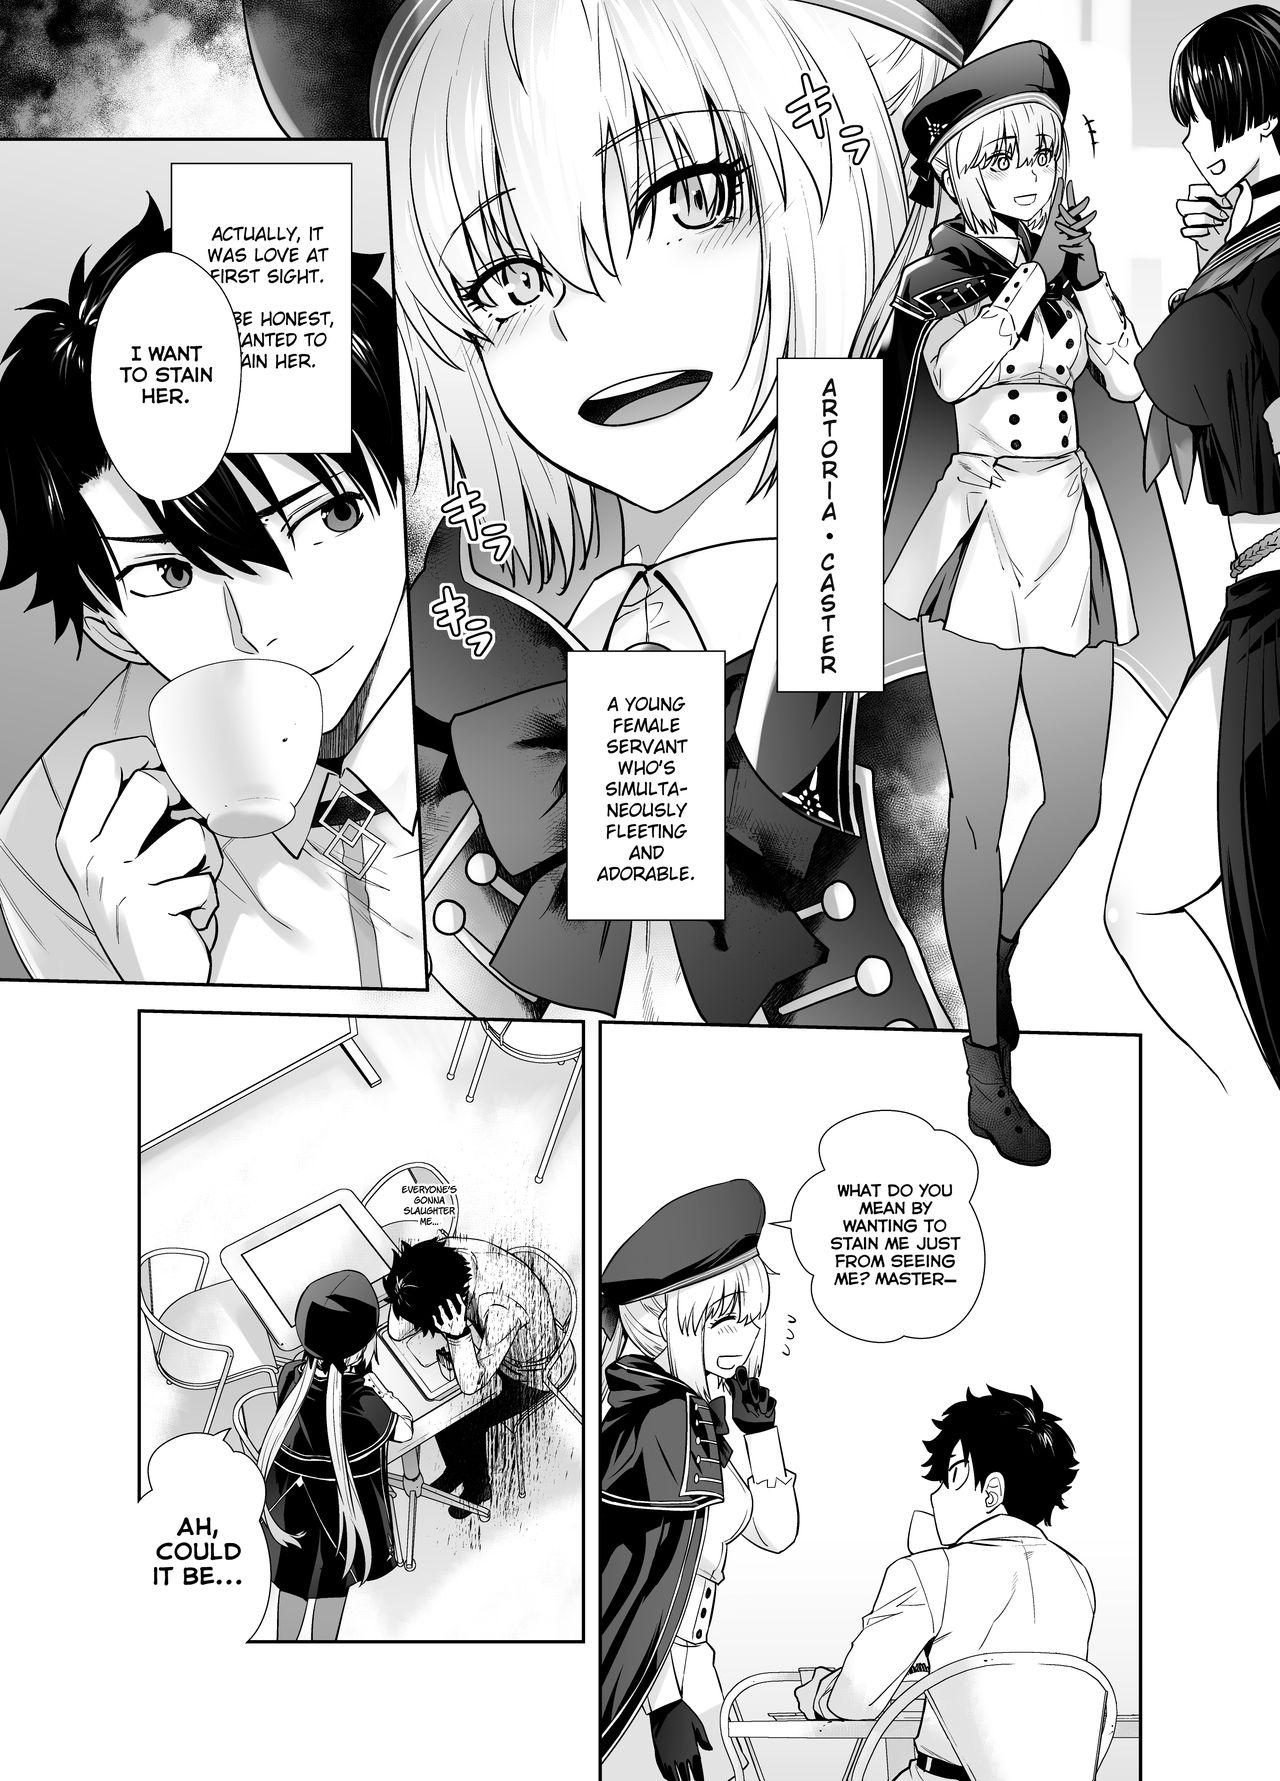 Animation HEAVEN'S DRIVE 6 - Fate grand order Striptease - Page 7